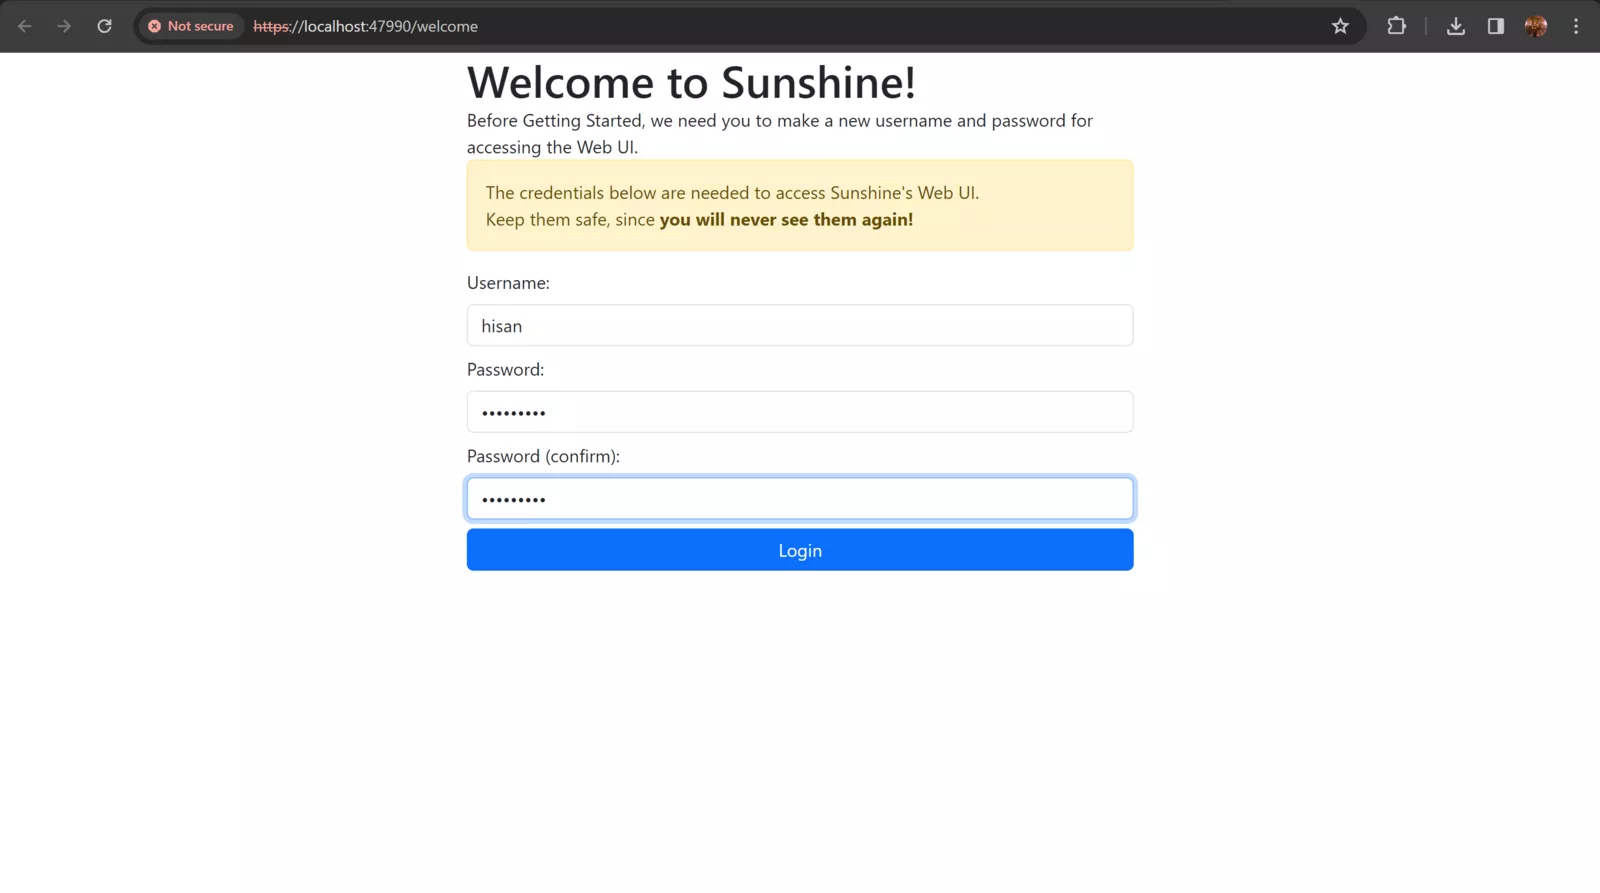 Image showing Sunshine's log in page
